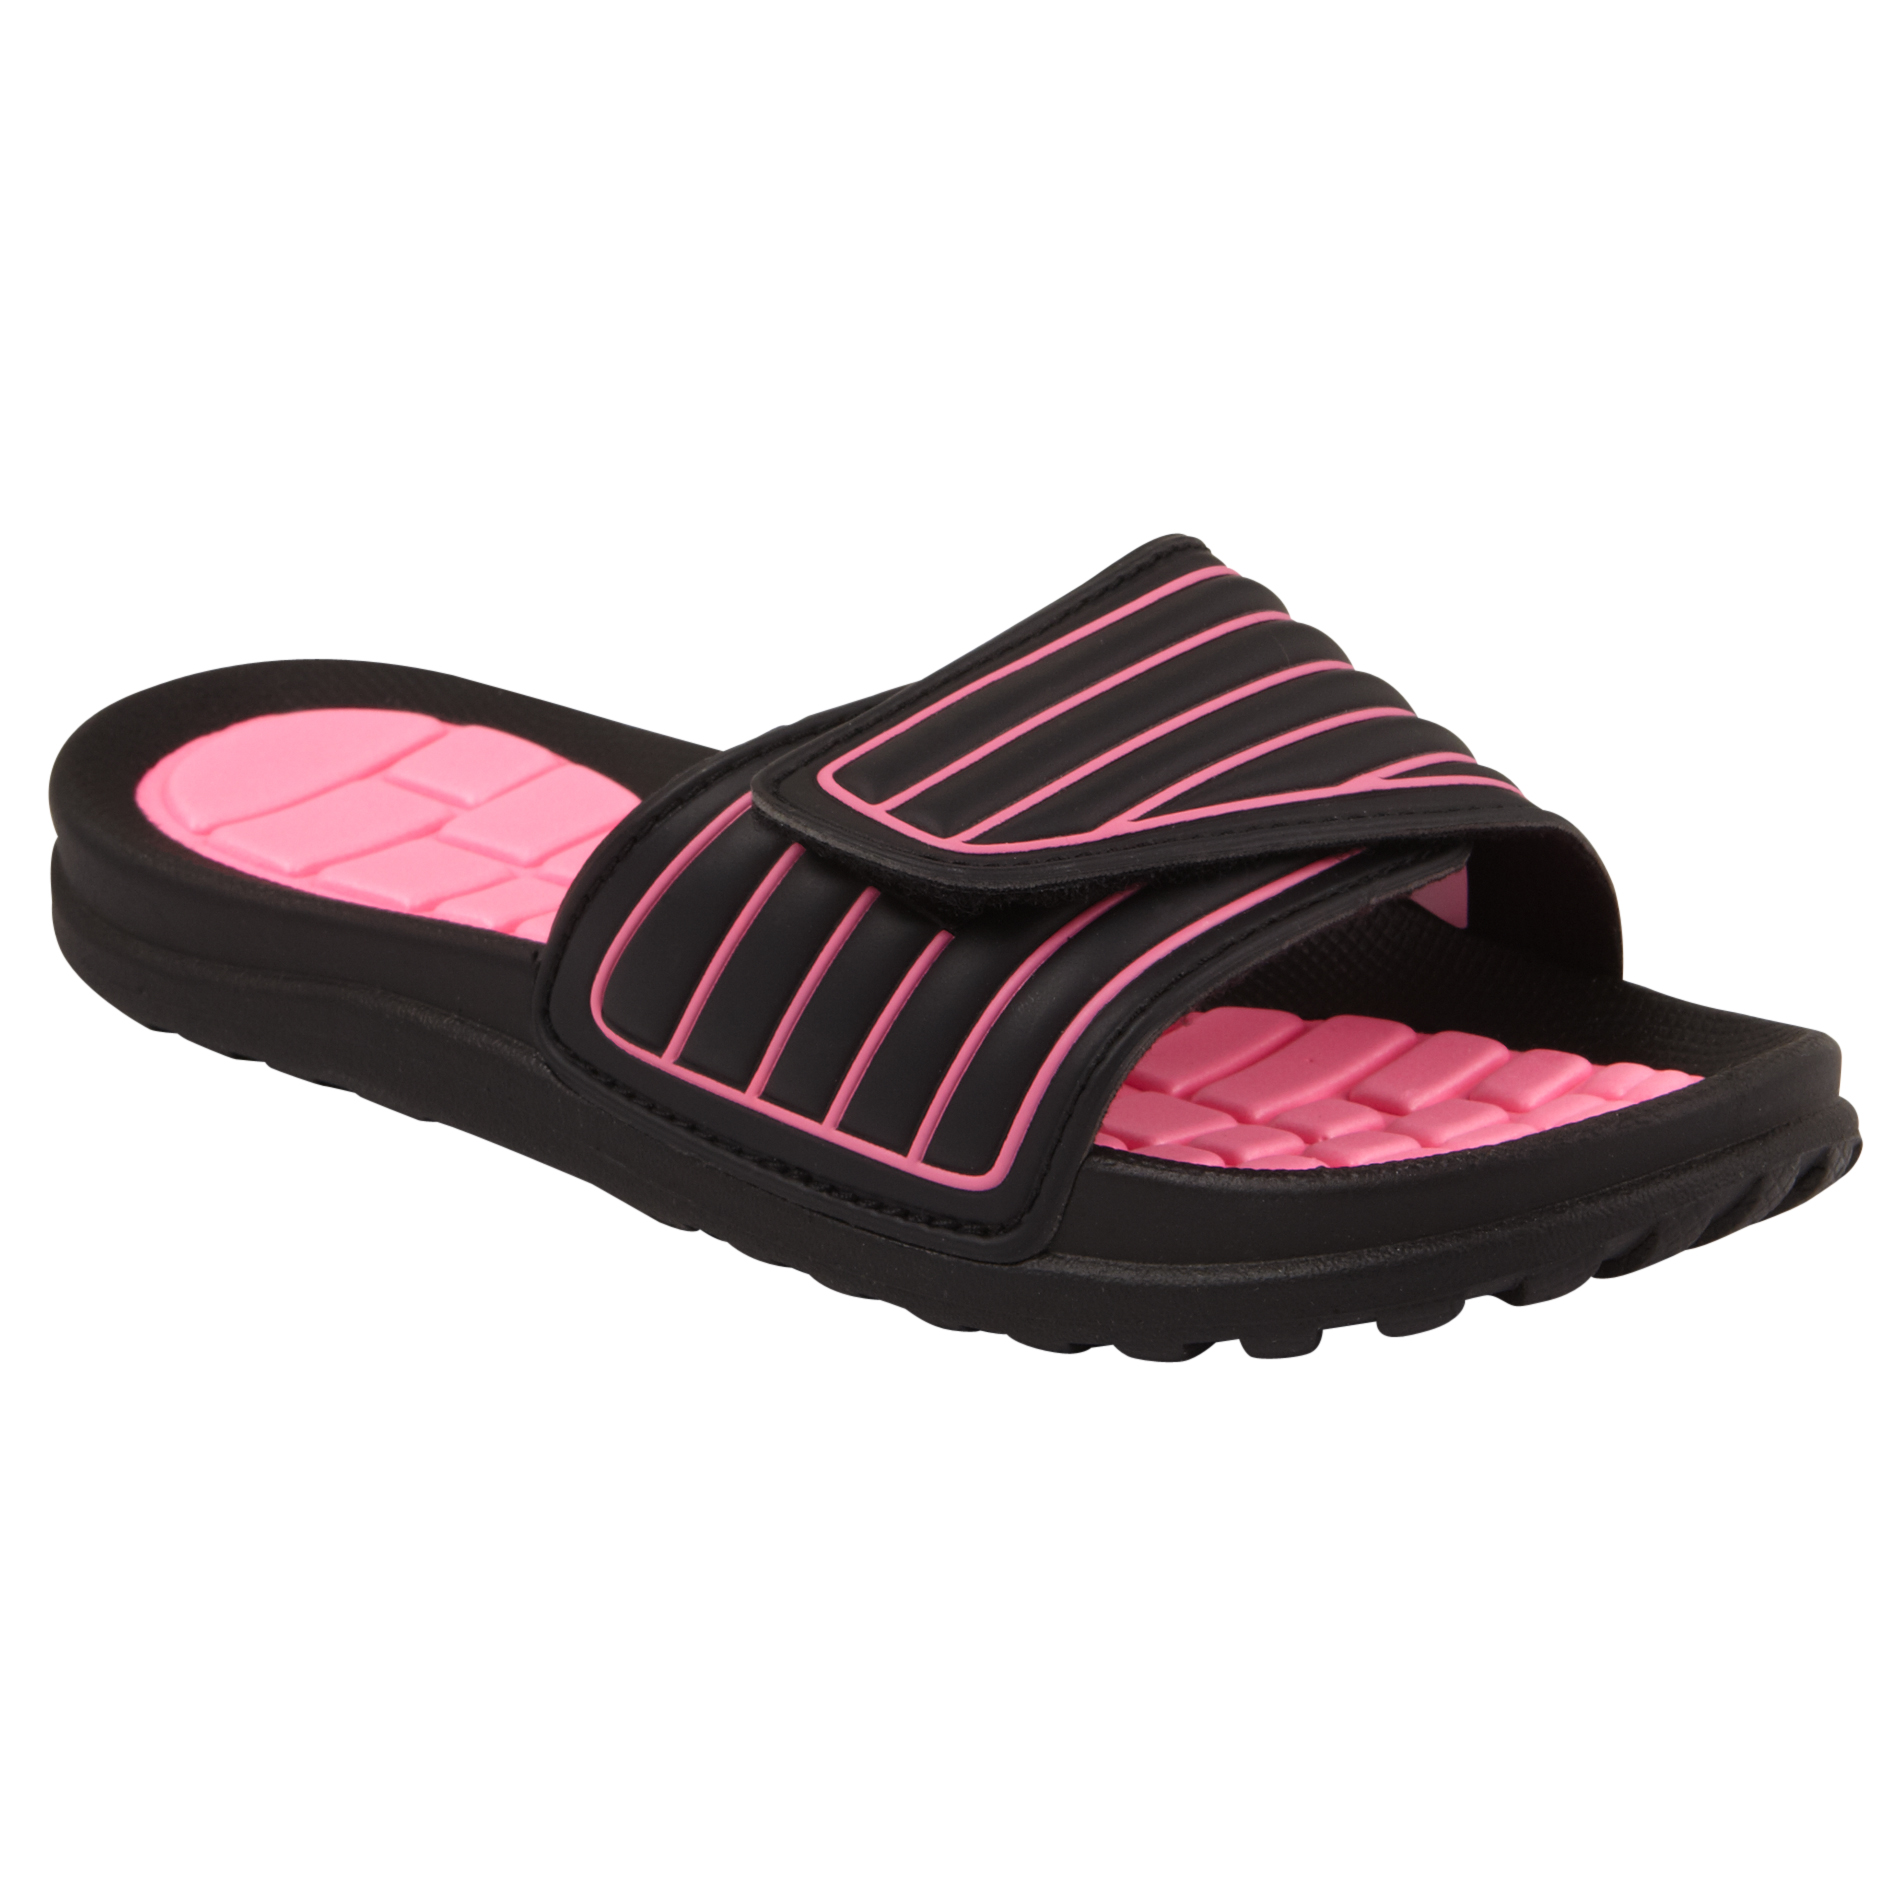 Athletech Girl's Sandal Rugby - Pink